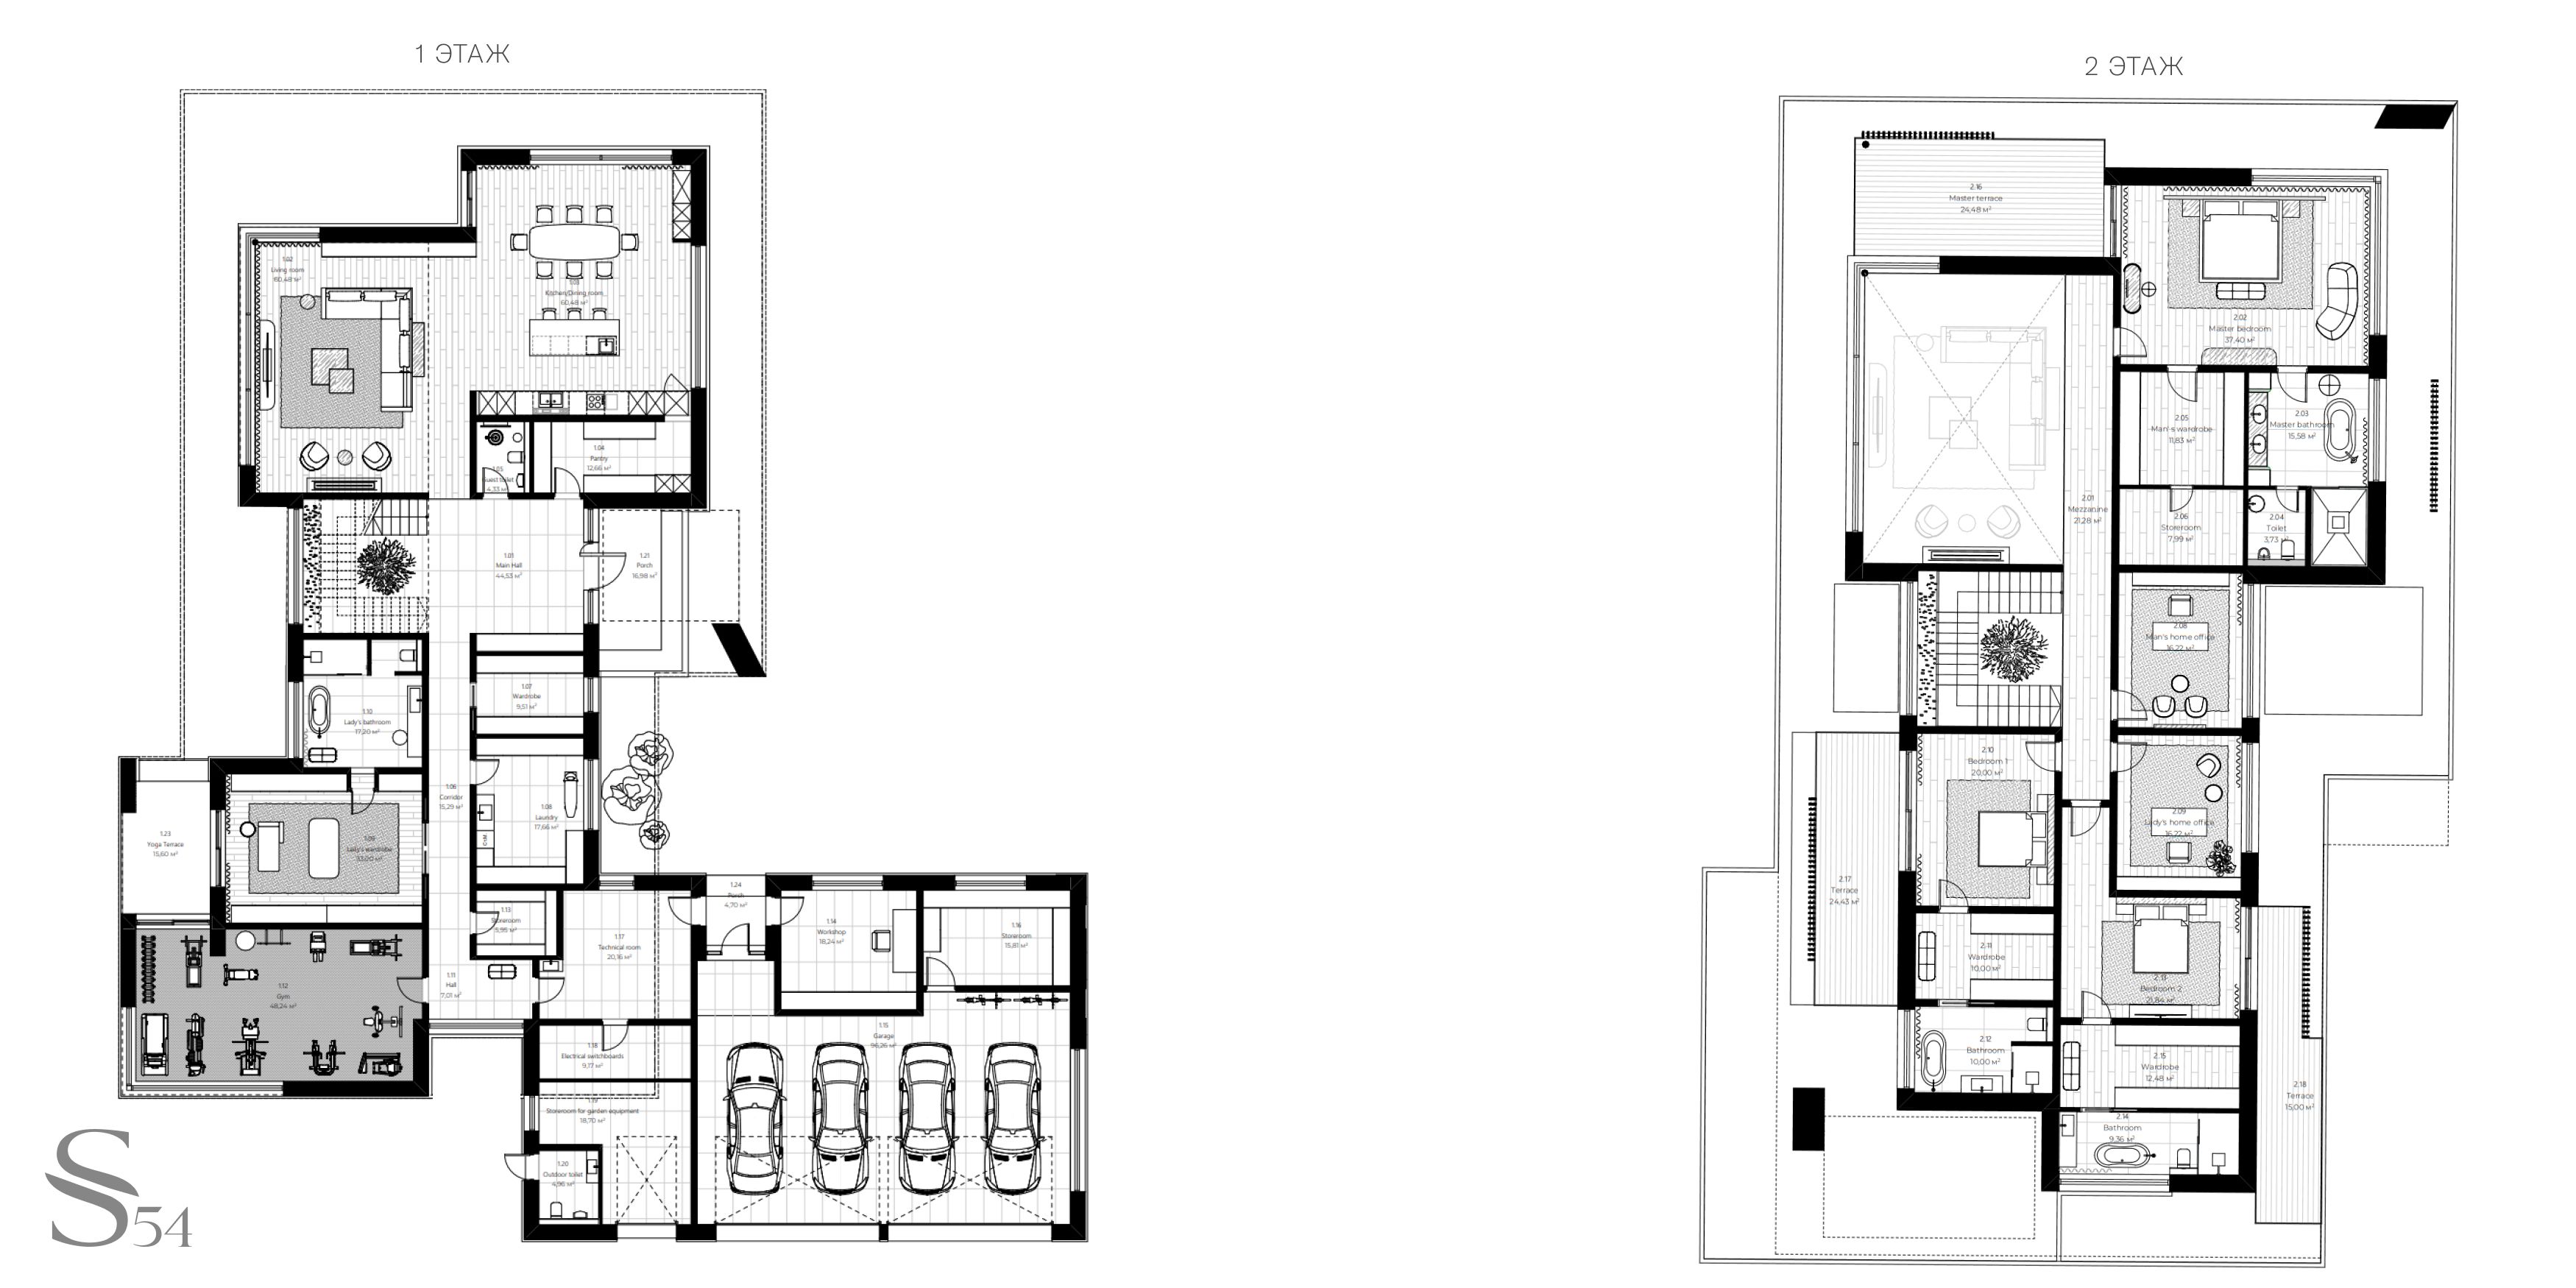 Layout of the house area 652m² for 3 bedrooms